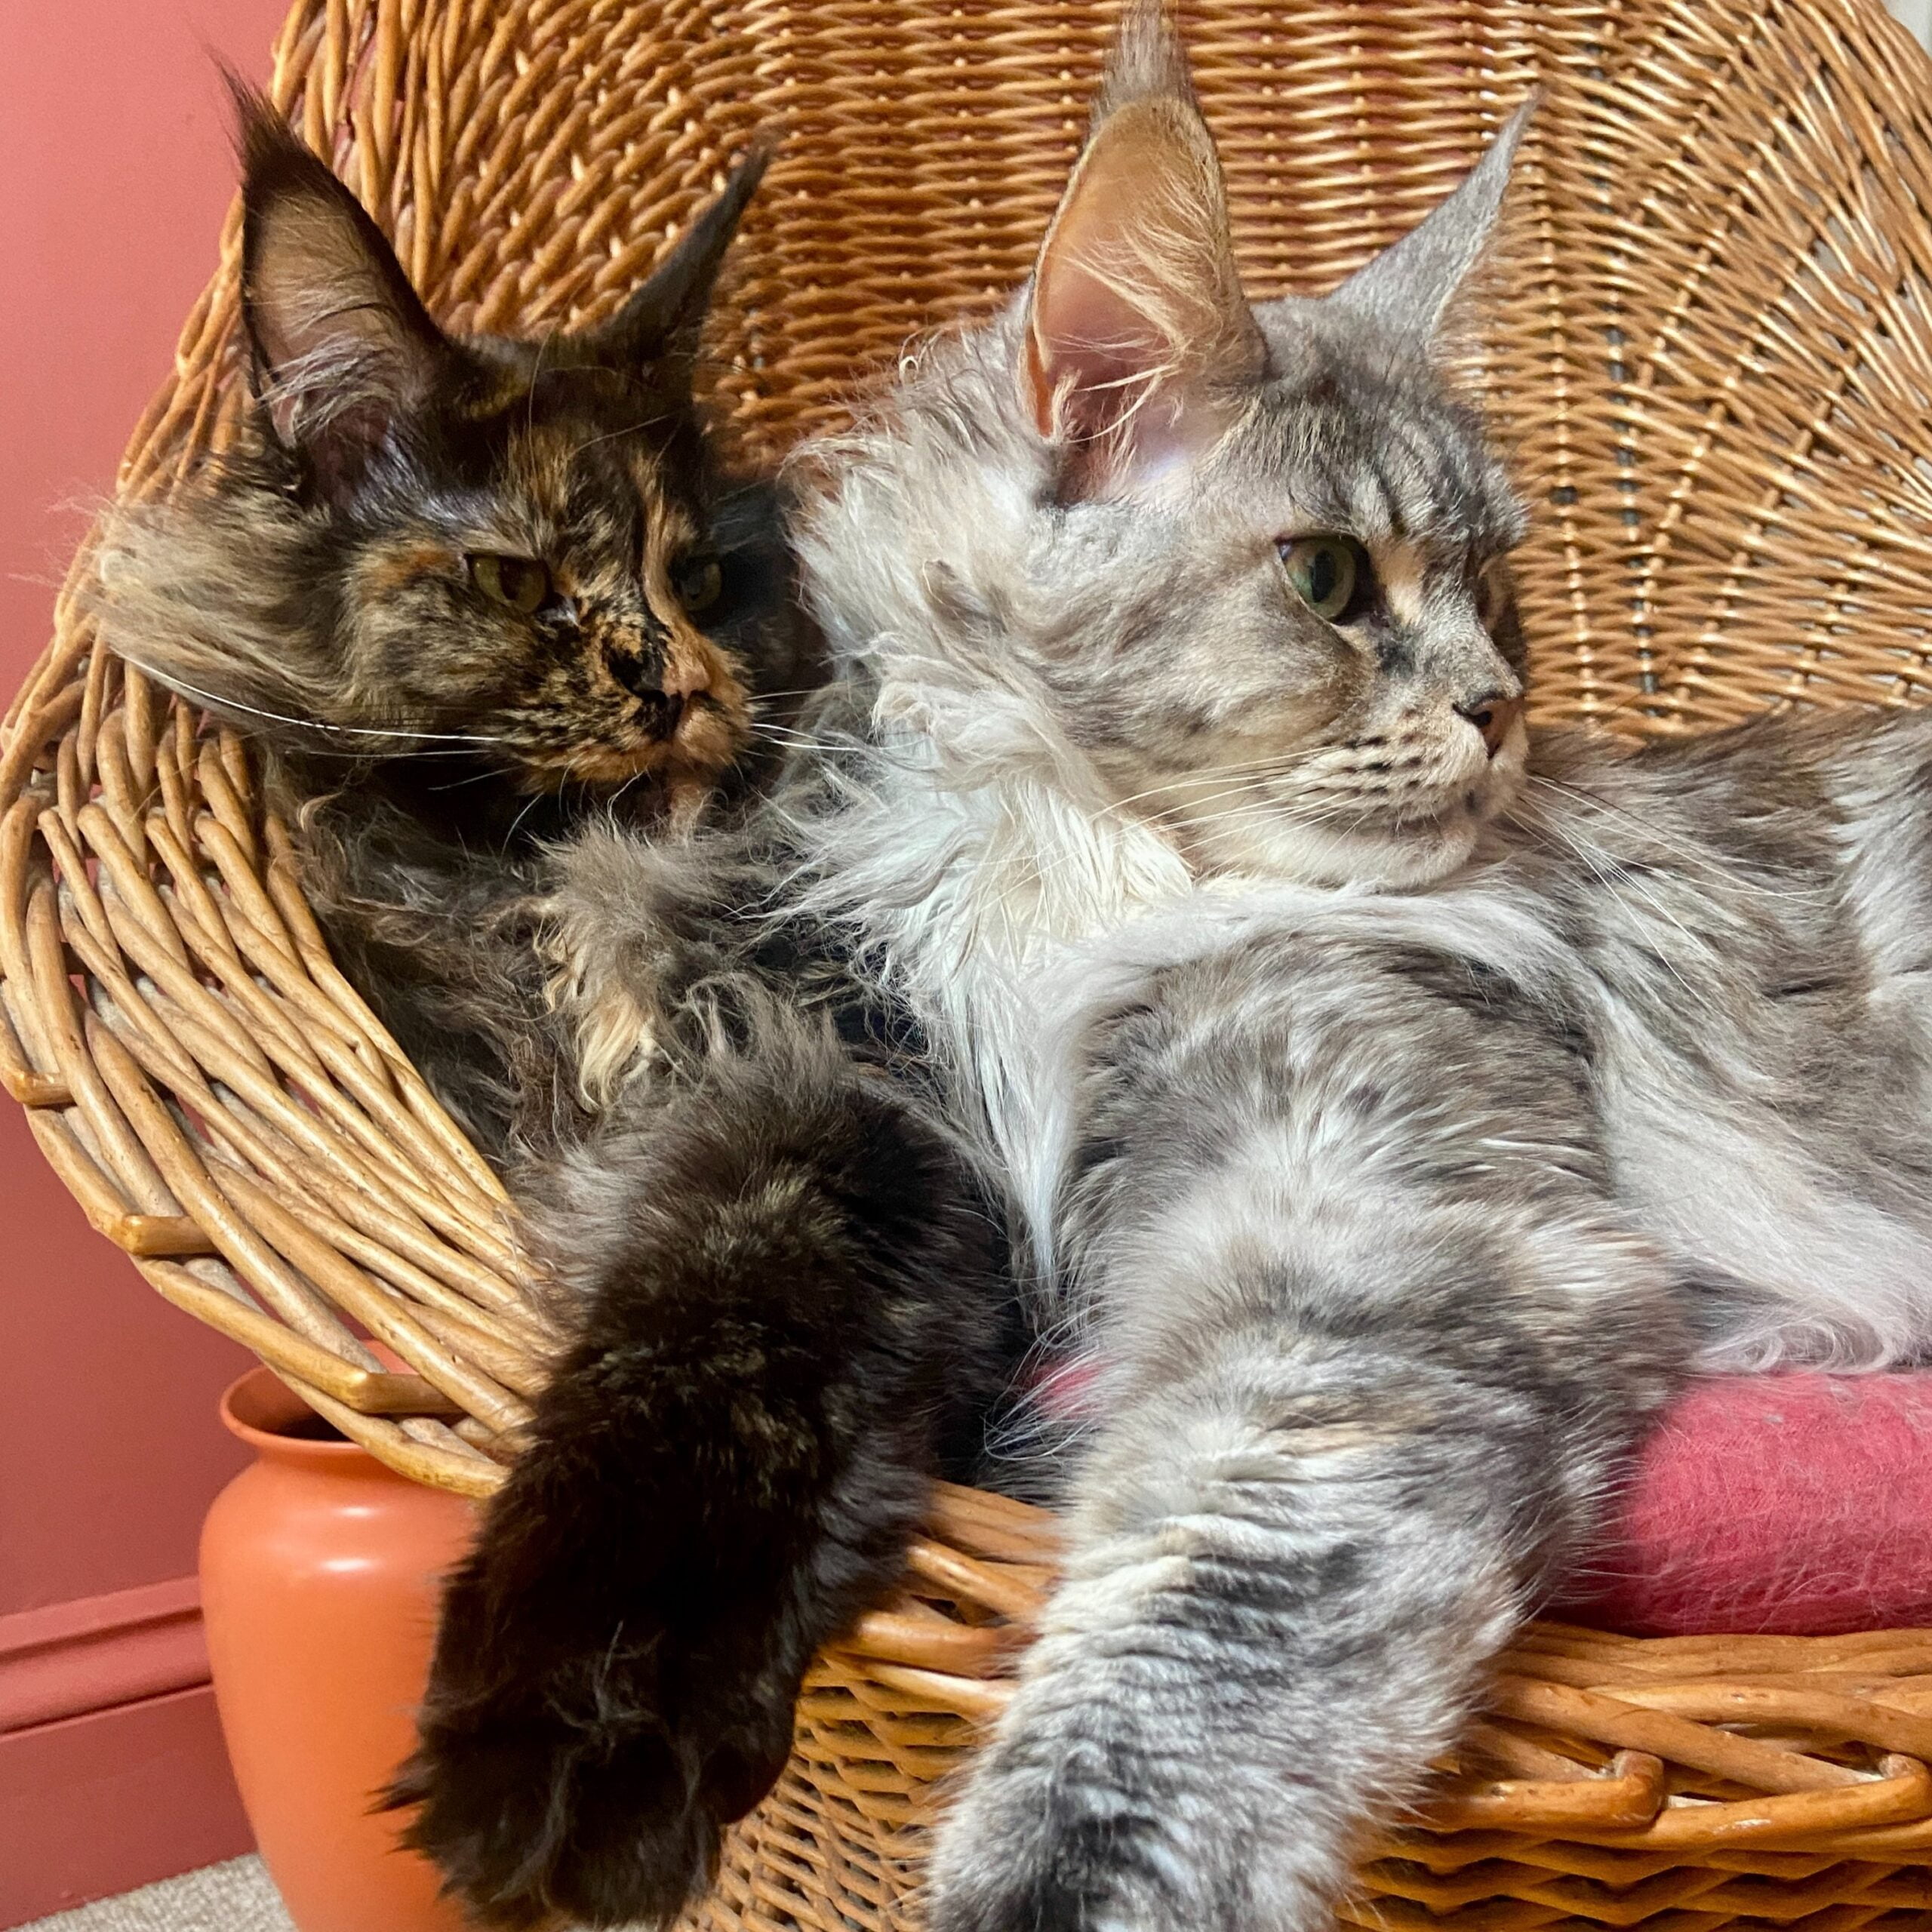 Two maine coon cats laying together.